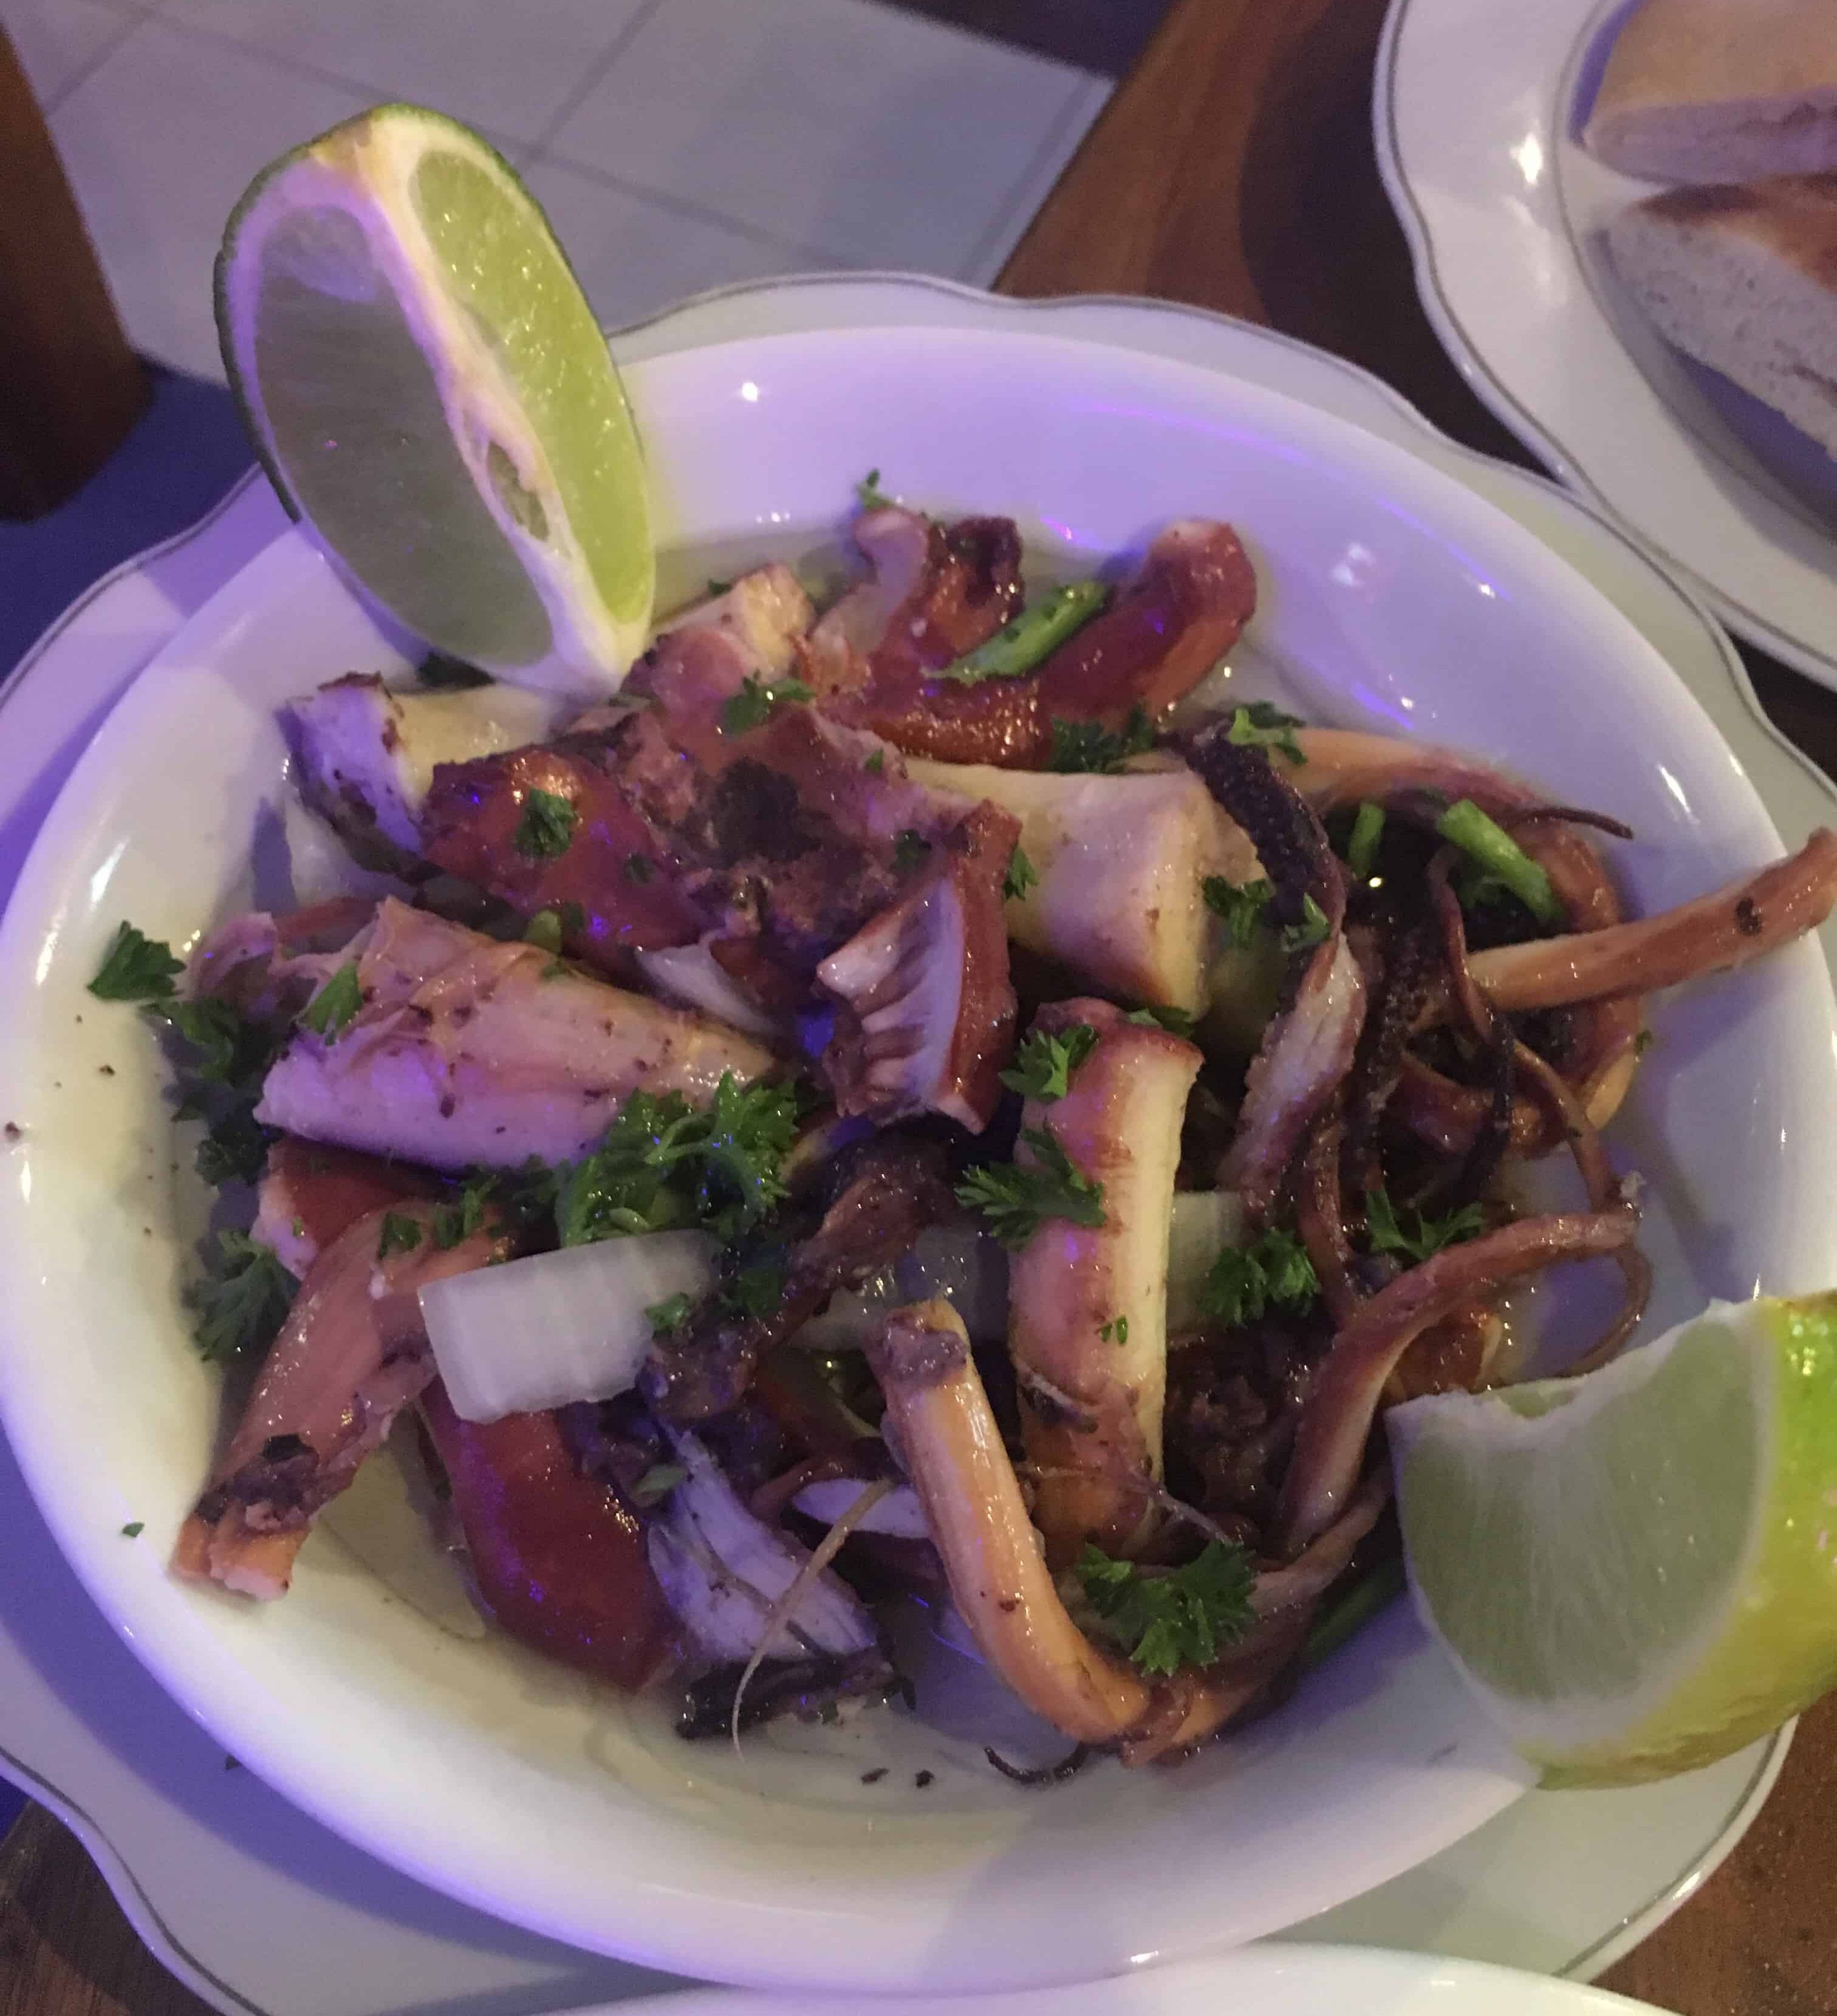 Octopus at The Greek Connection in Medellín, Antioquia, Colombia